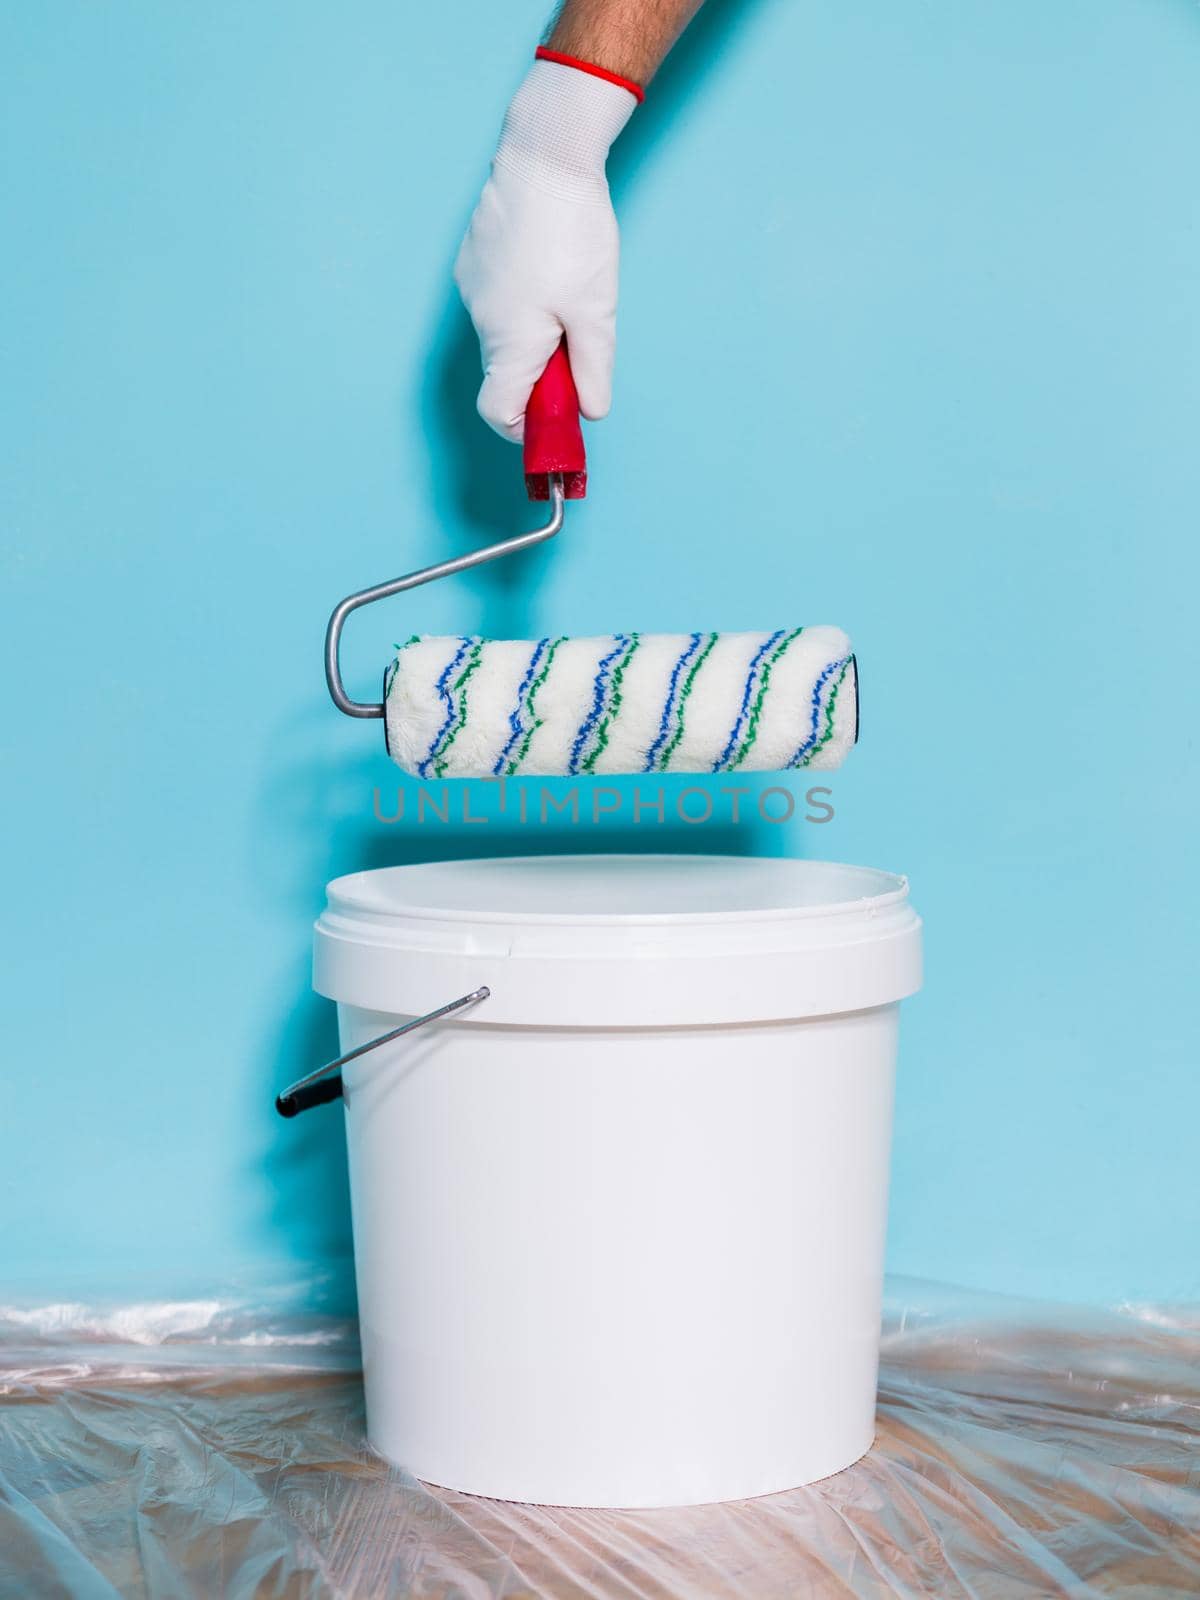 Image of paint can and man holding paint roller in front of blue wall.